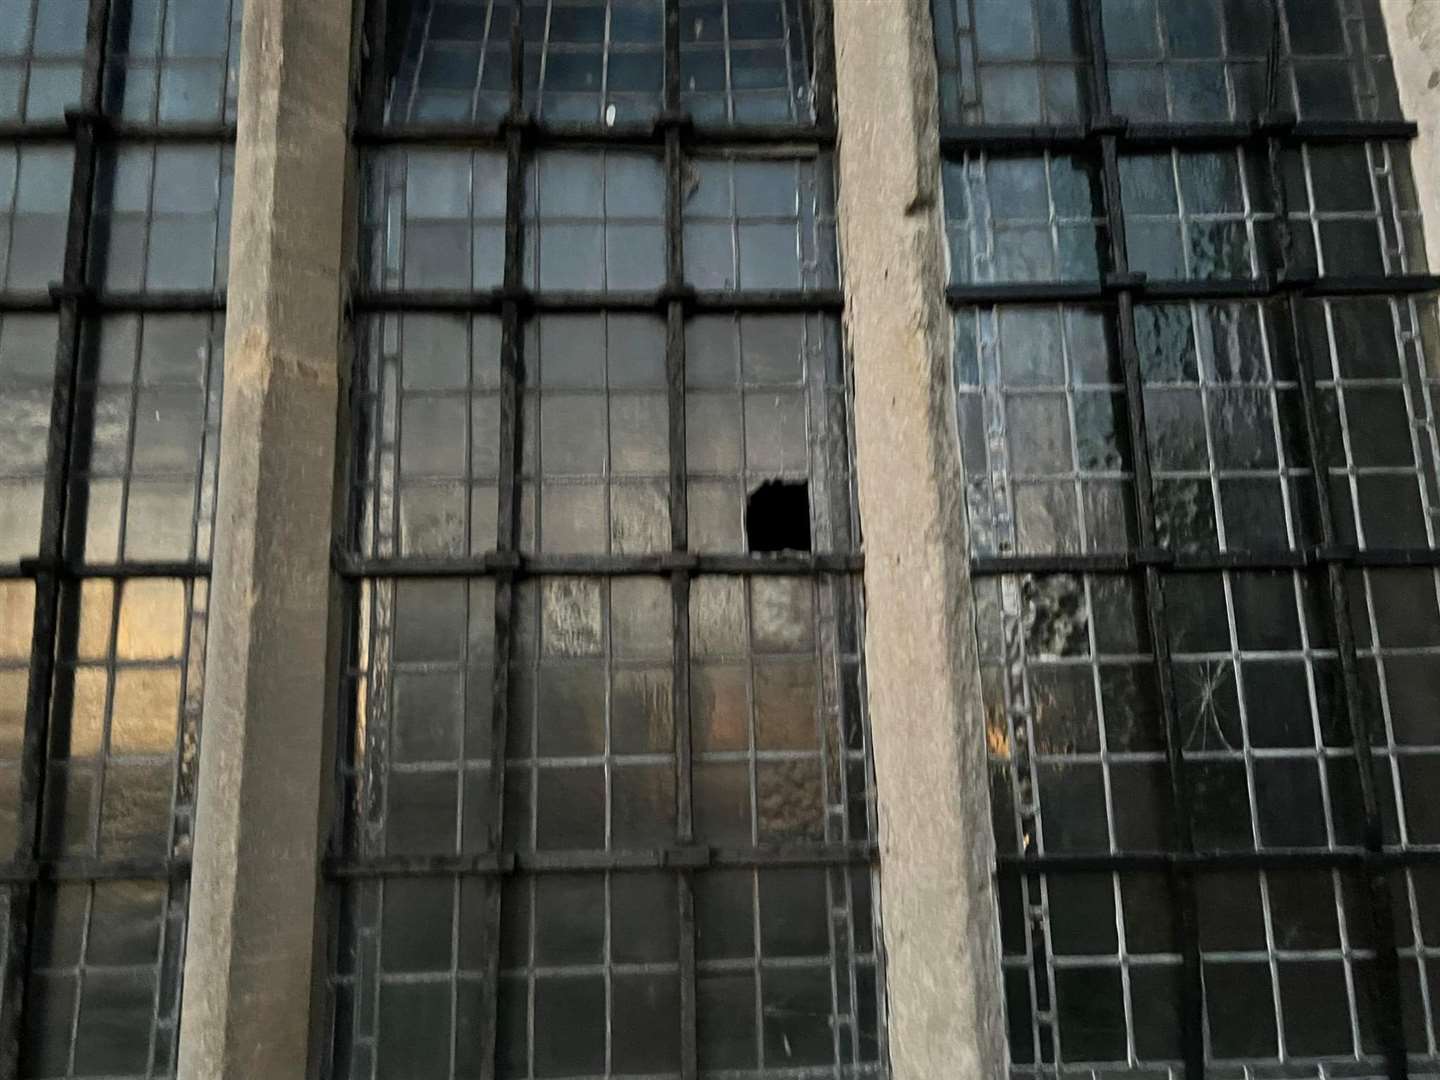 The damaged windows at the Cliffe church